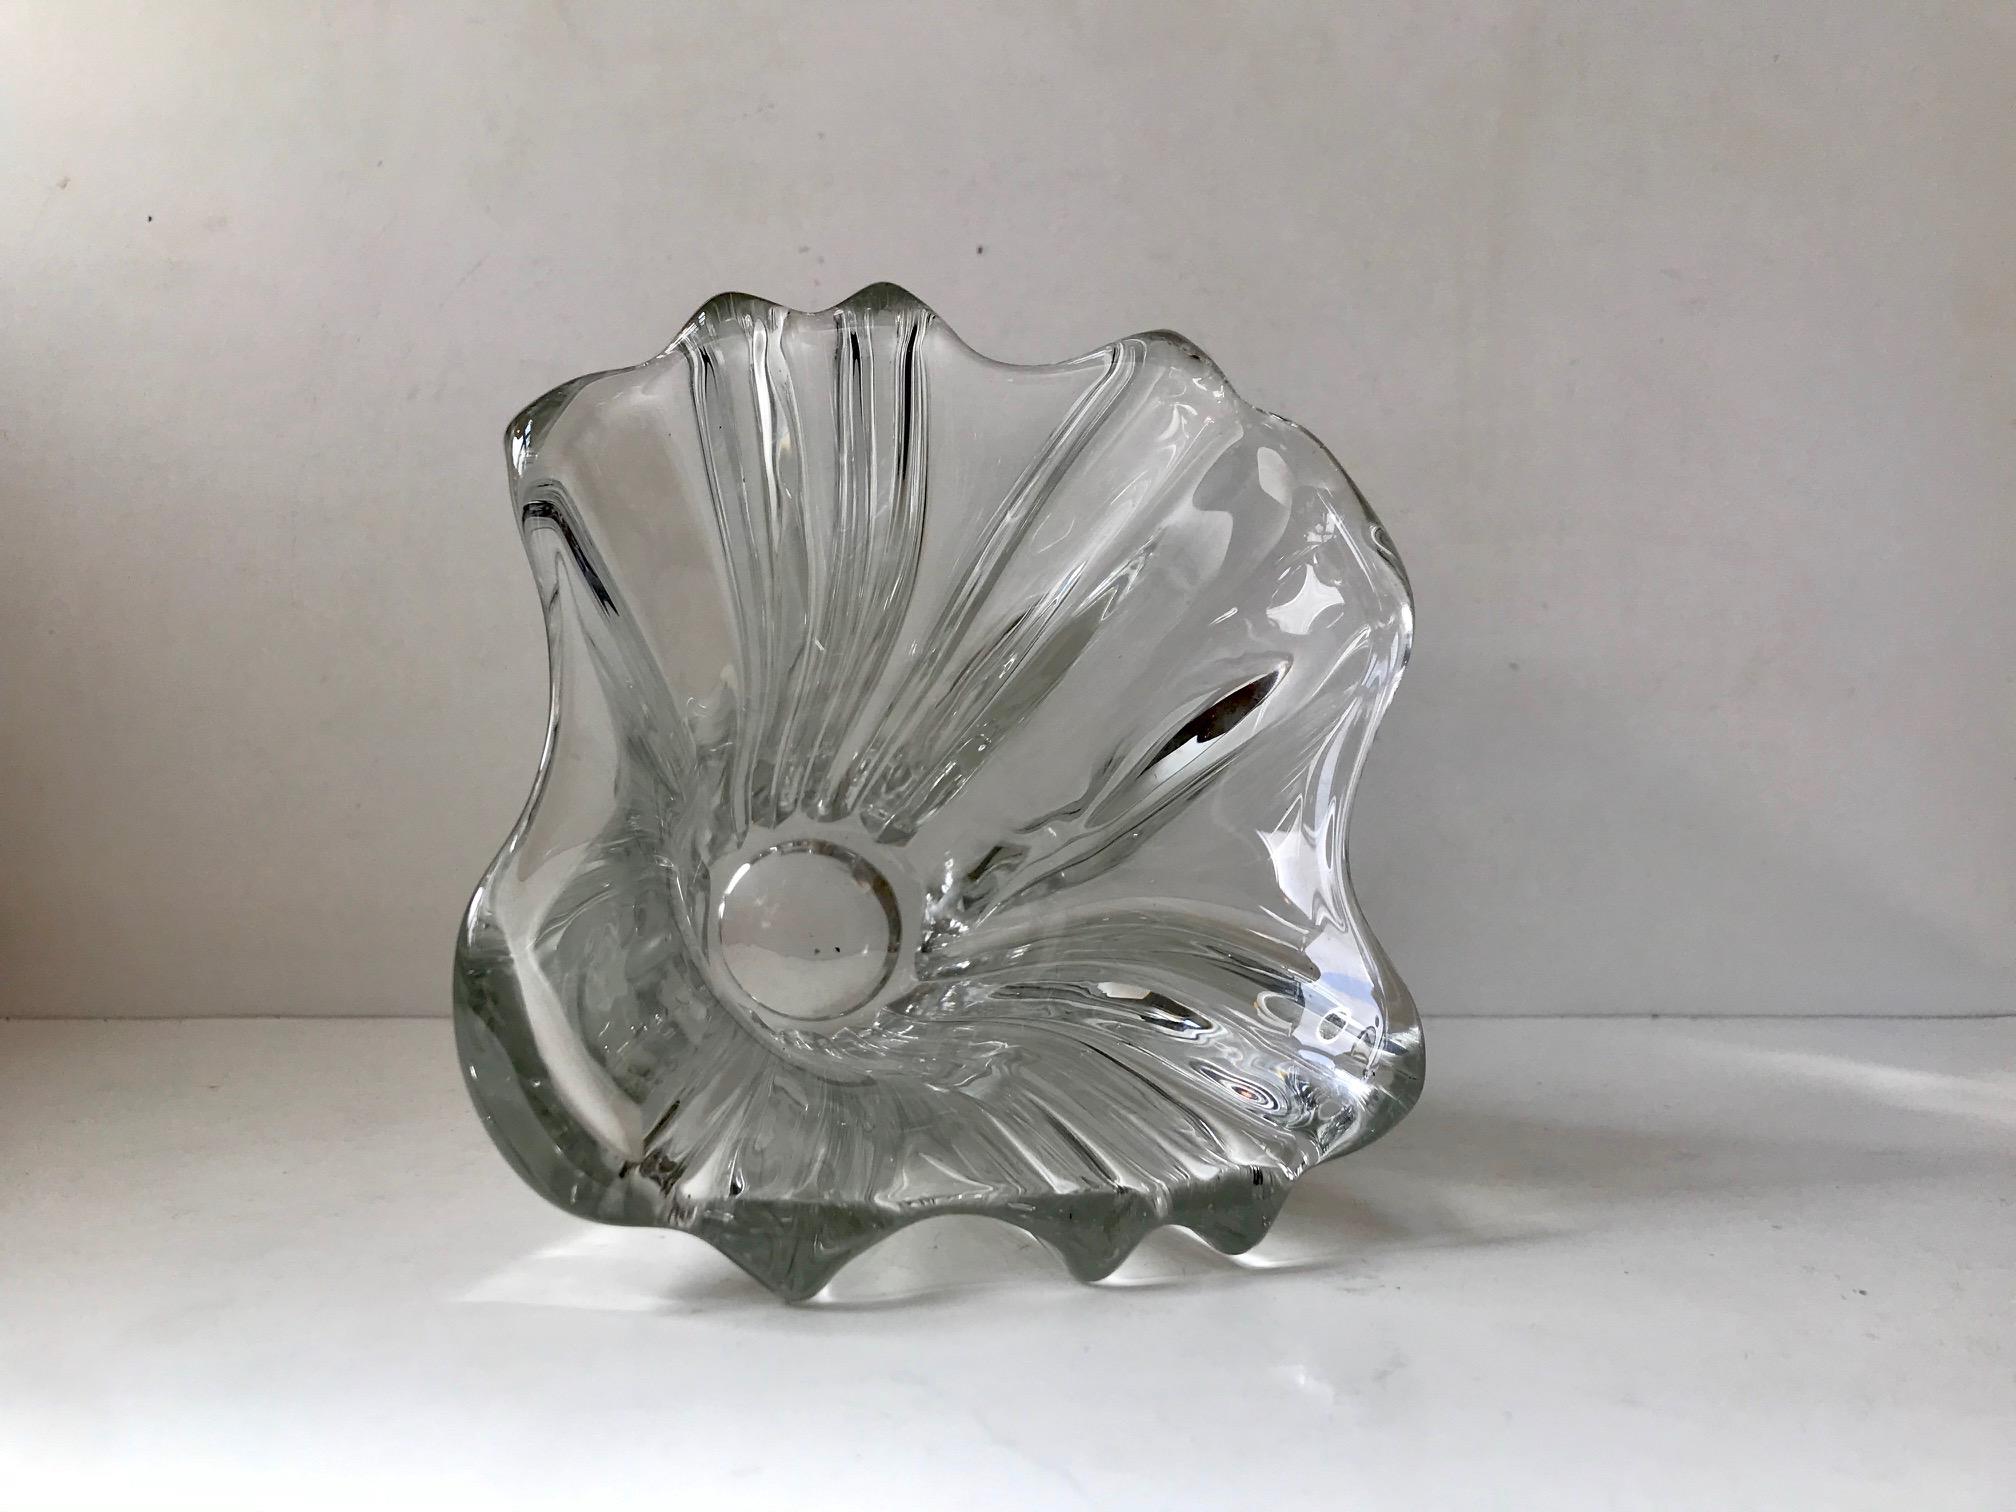 Heavy Swedish crystal vase that resembles a shooting star. Designed in-house at Kosta in Sweden during the 1970s. The sticker from Kosta in no longer present. Its in fine intact and clean vintage condition. Measurements: H: 17, D: 18.5 cm.